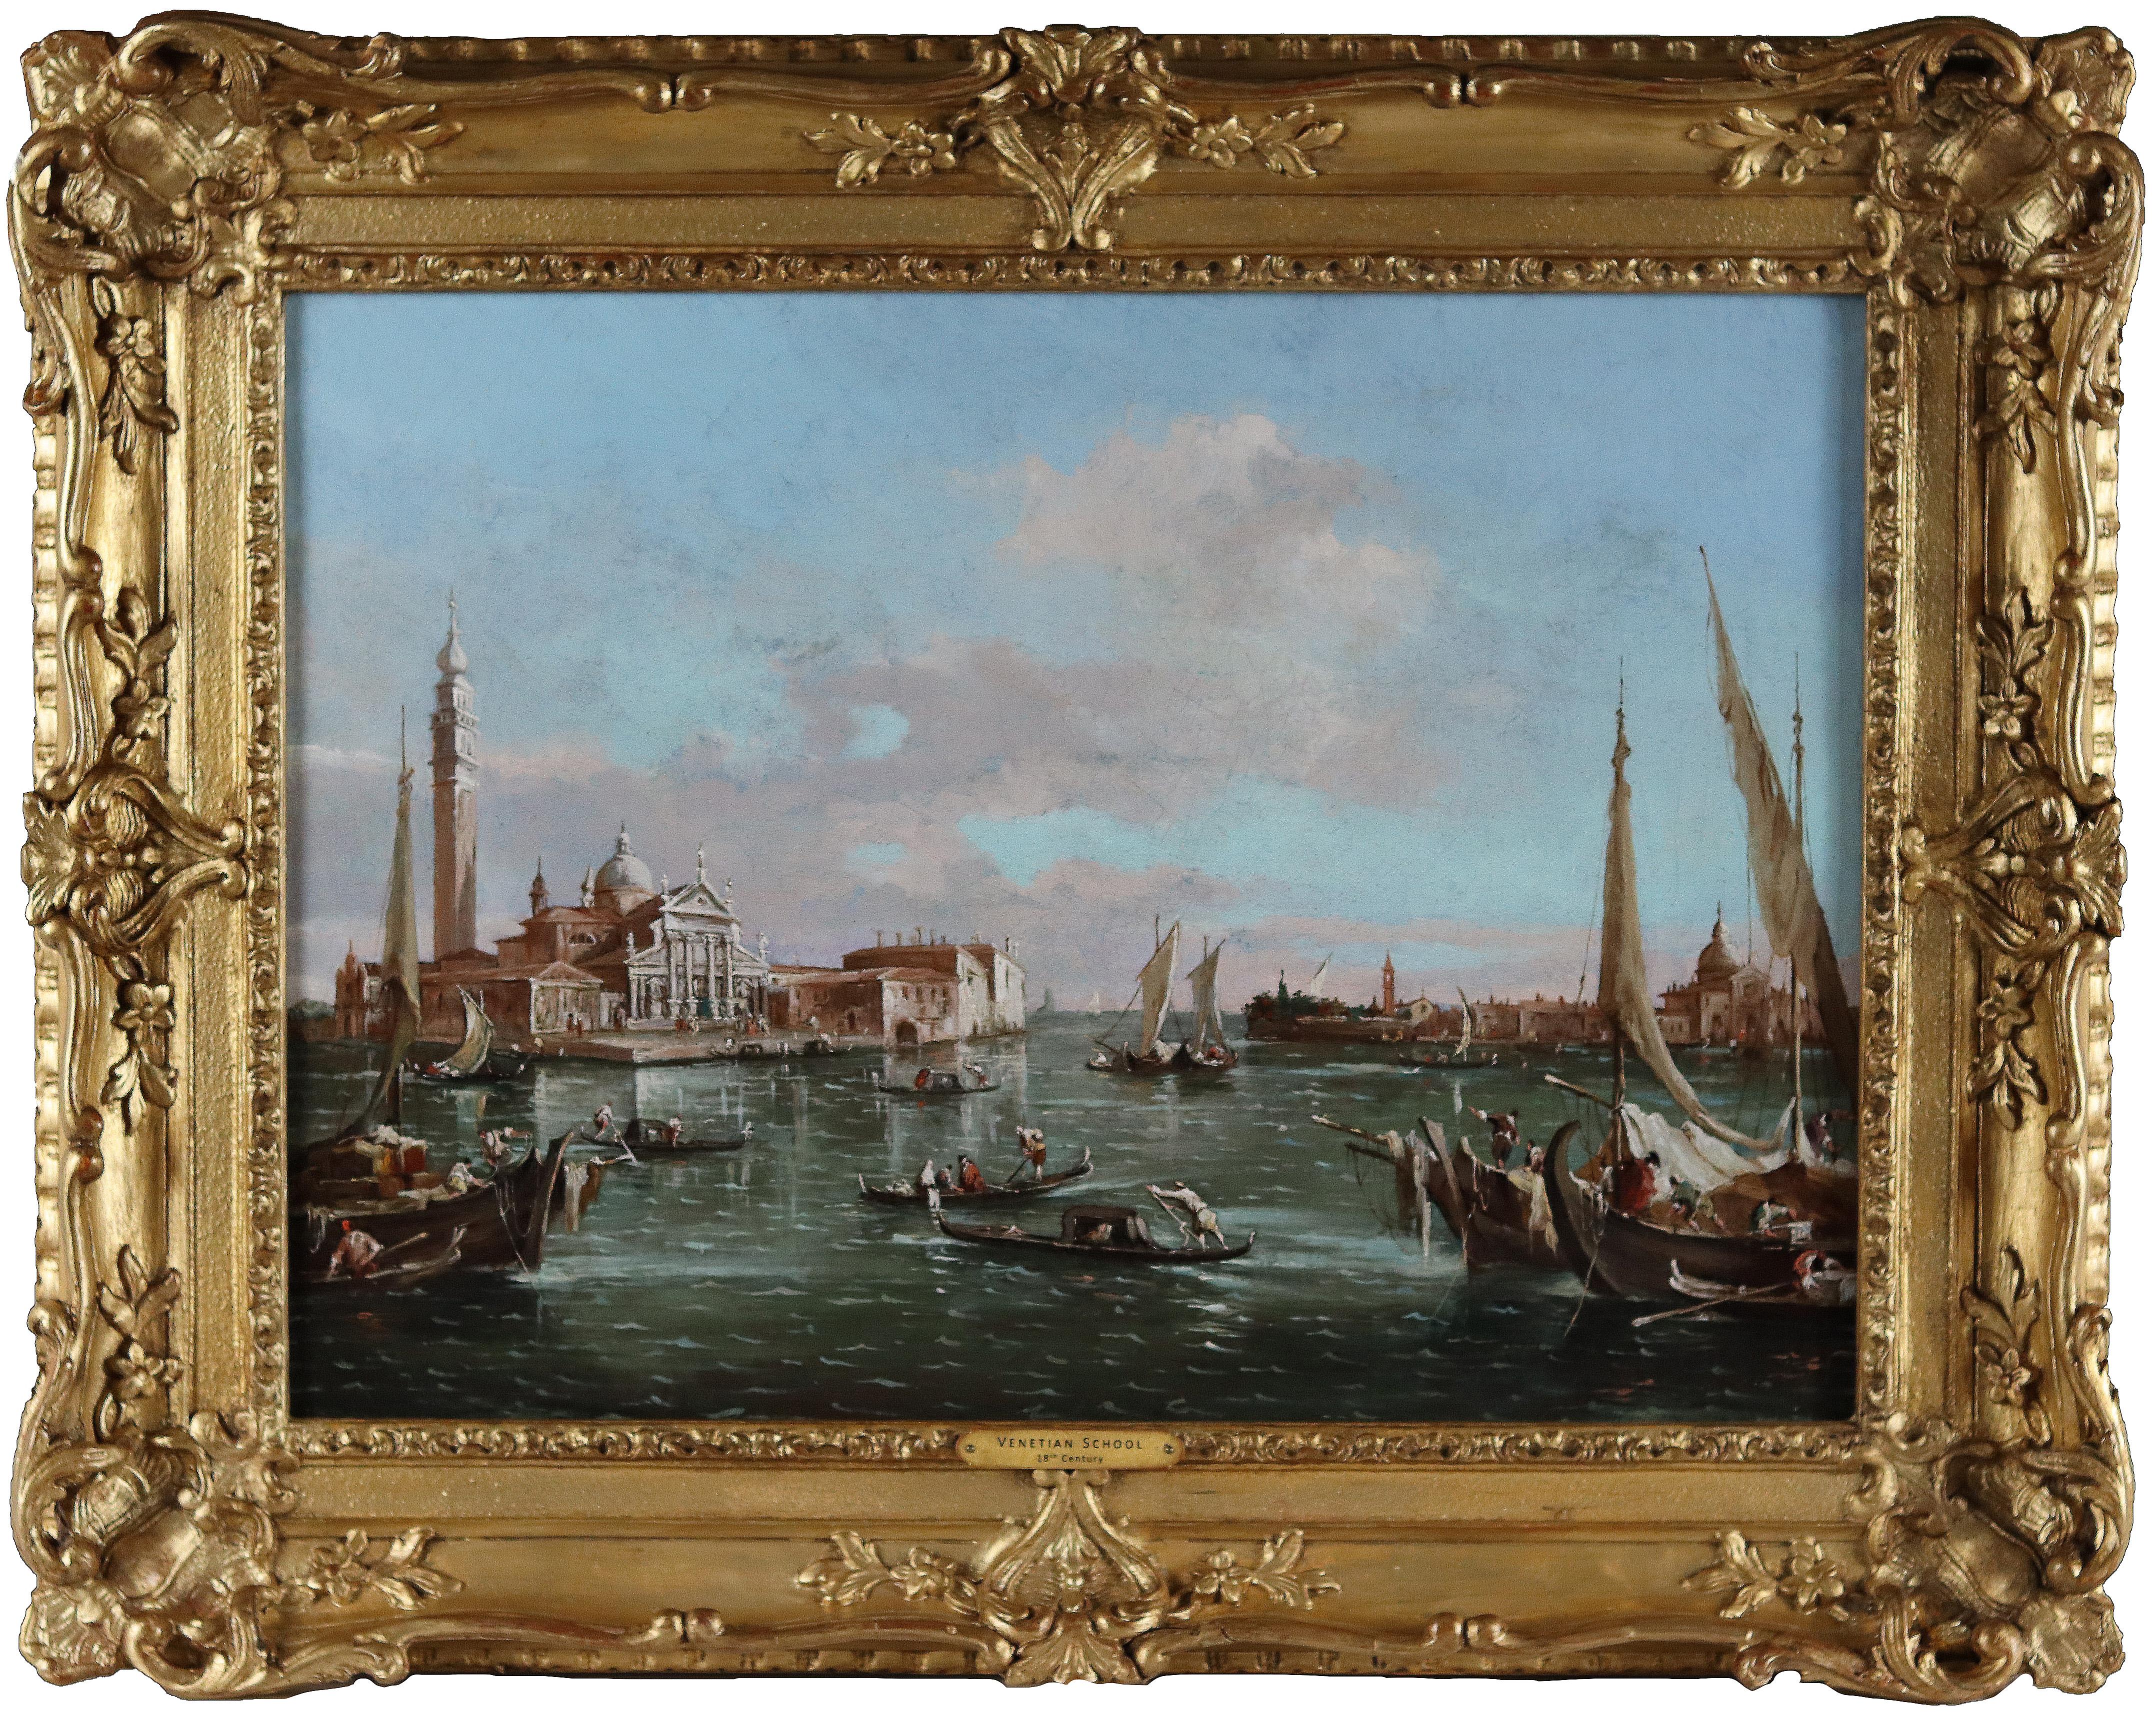 A Pair of 18th century Venetian Canal Scenes in the Style of Francesco Guardi   - Painting by 18th Century Italian School